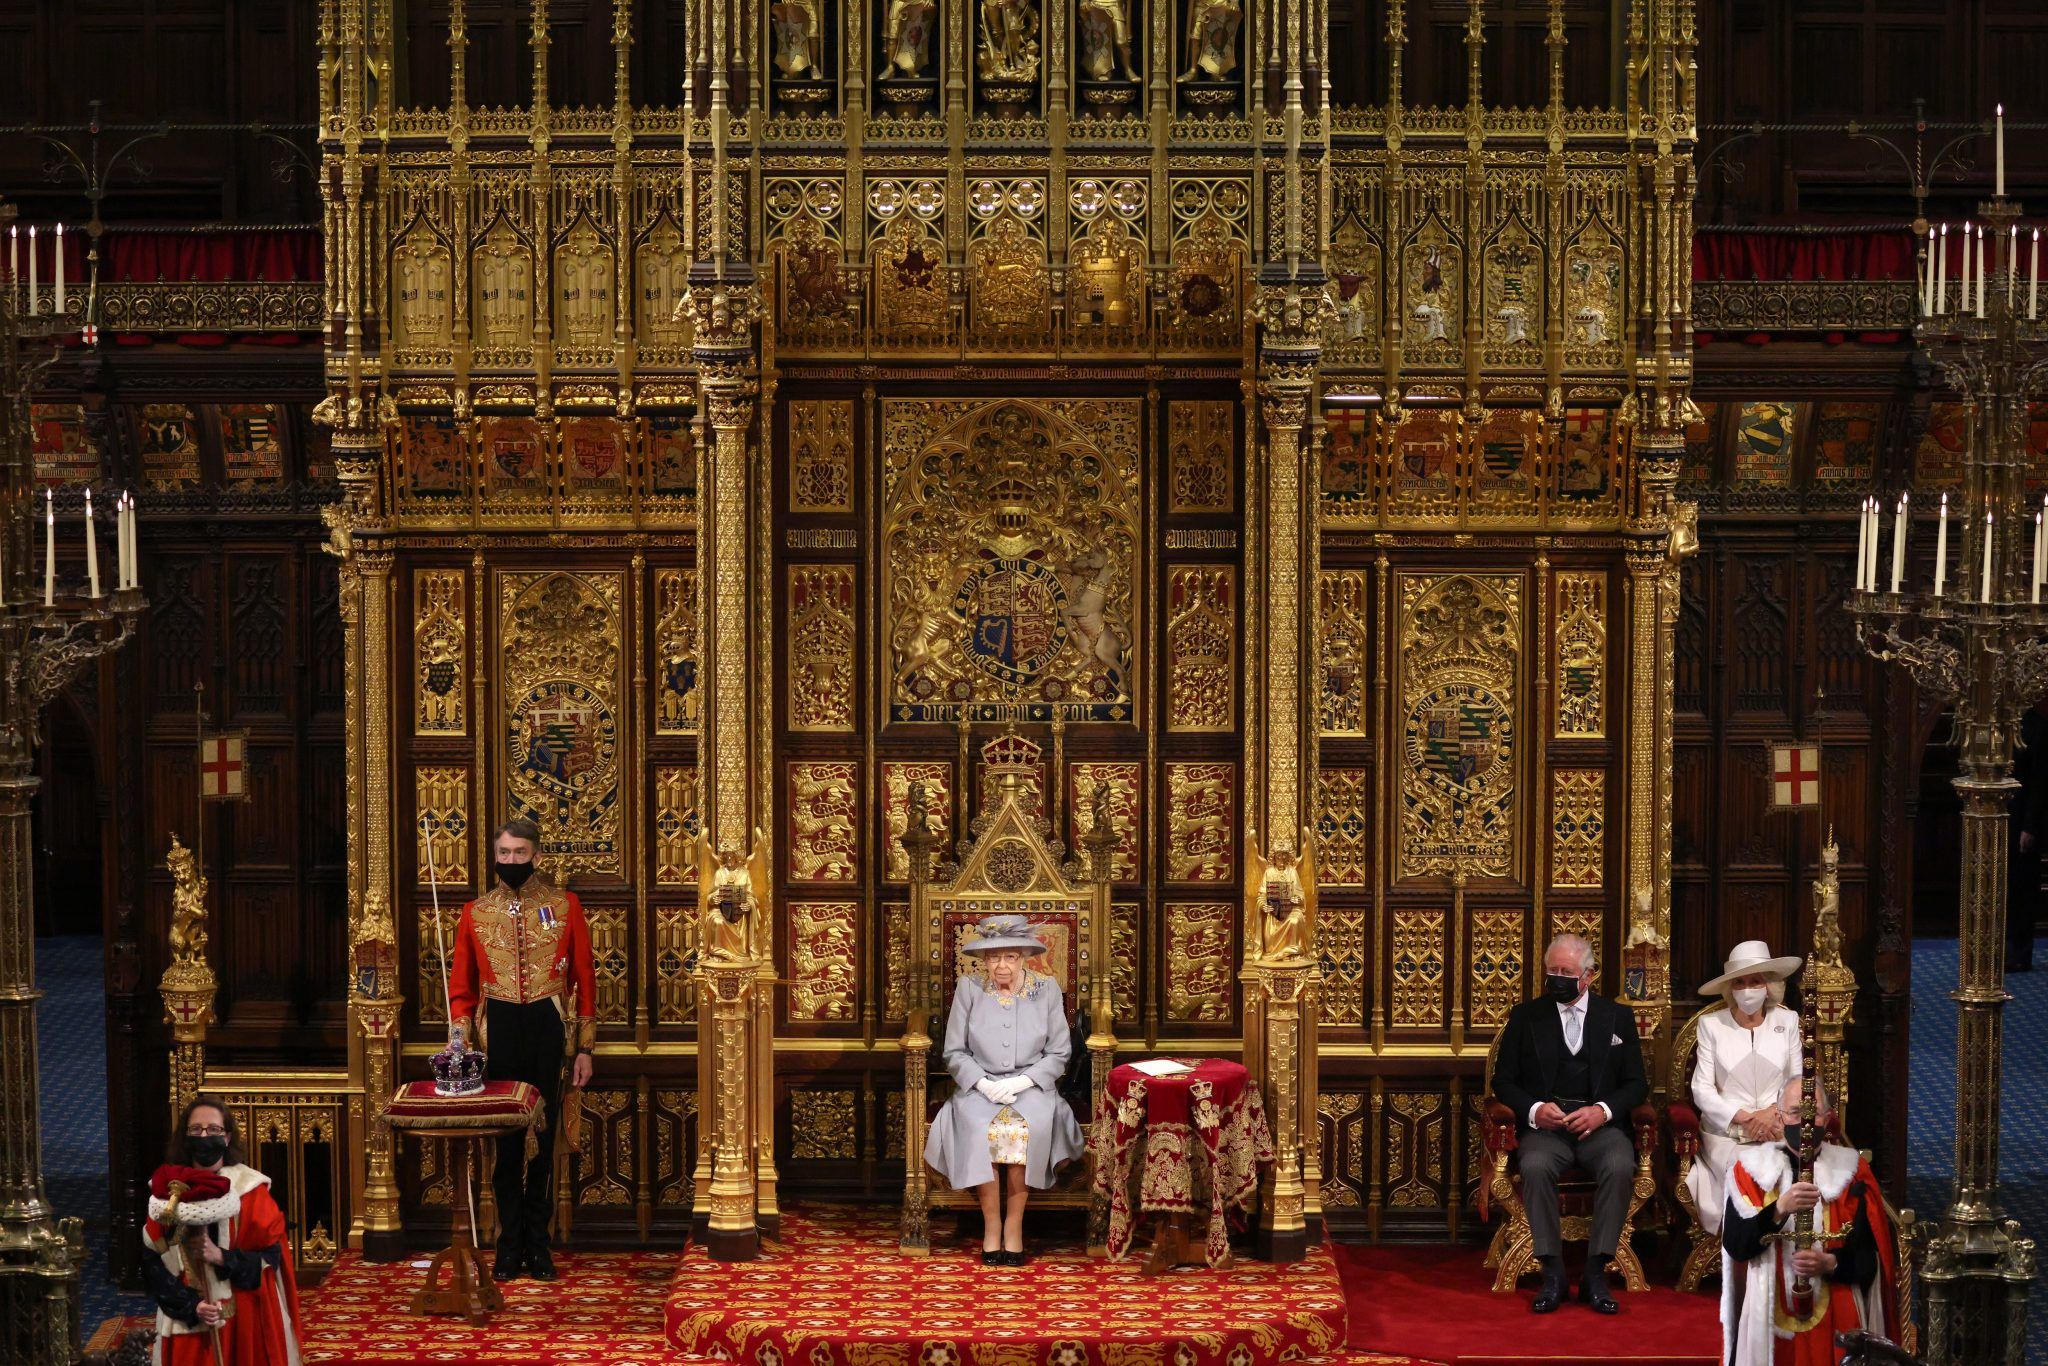 Queen Elizabeth II in the House of Lord's Chamber with Prince Charles, Prince of Wales and Camilla, Duchess of Cornwall seated (R) during the State Opening of Parliament at the House of Lords on May 11, 2021 in London, England. (Photo by Chris Jackson - WPA Pool/Getty Images)